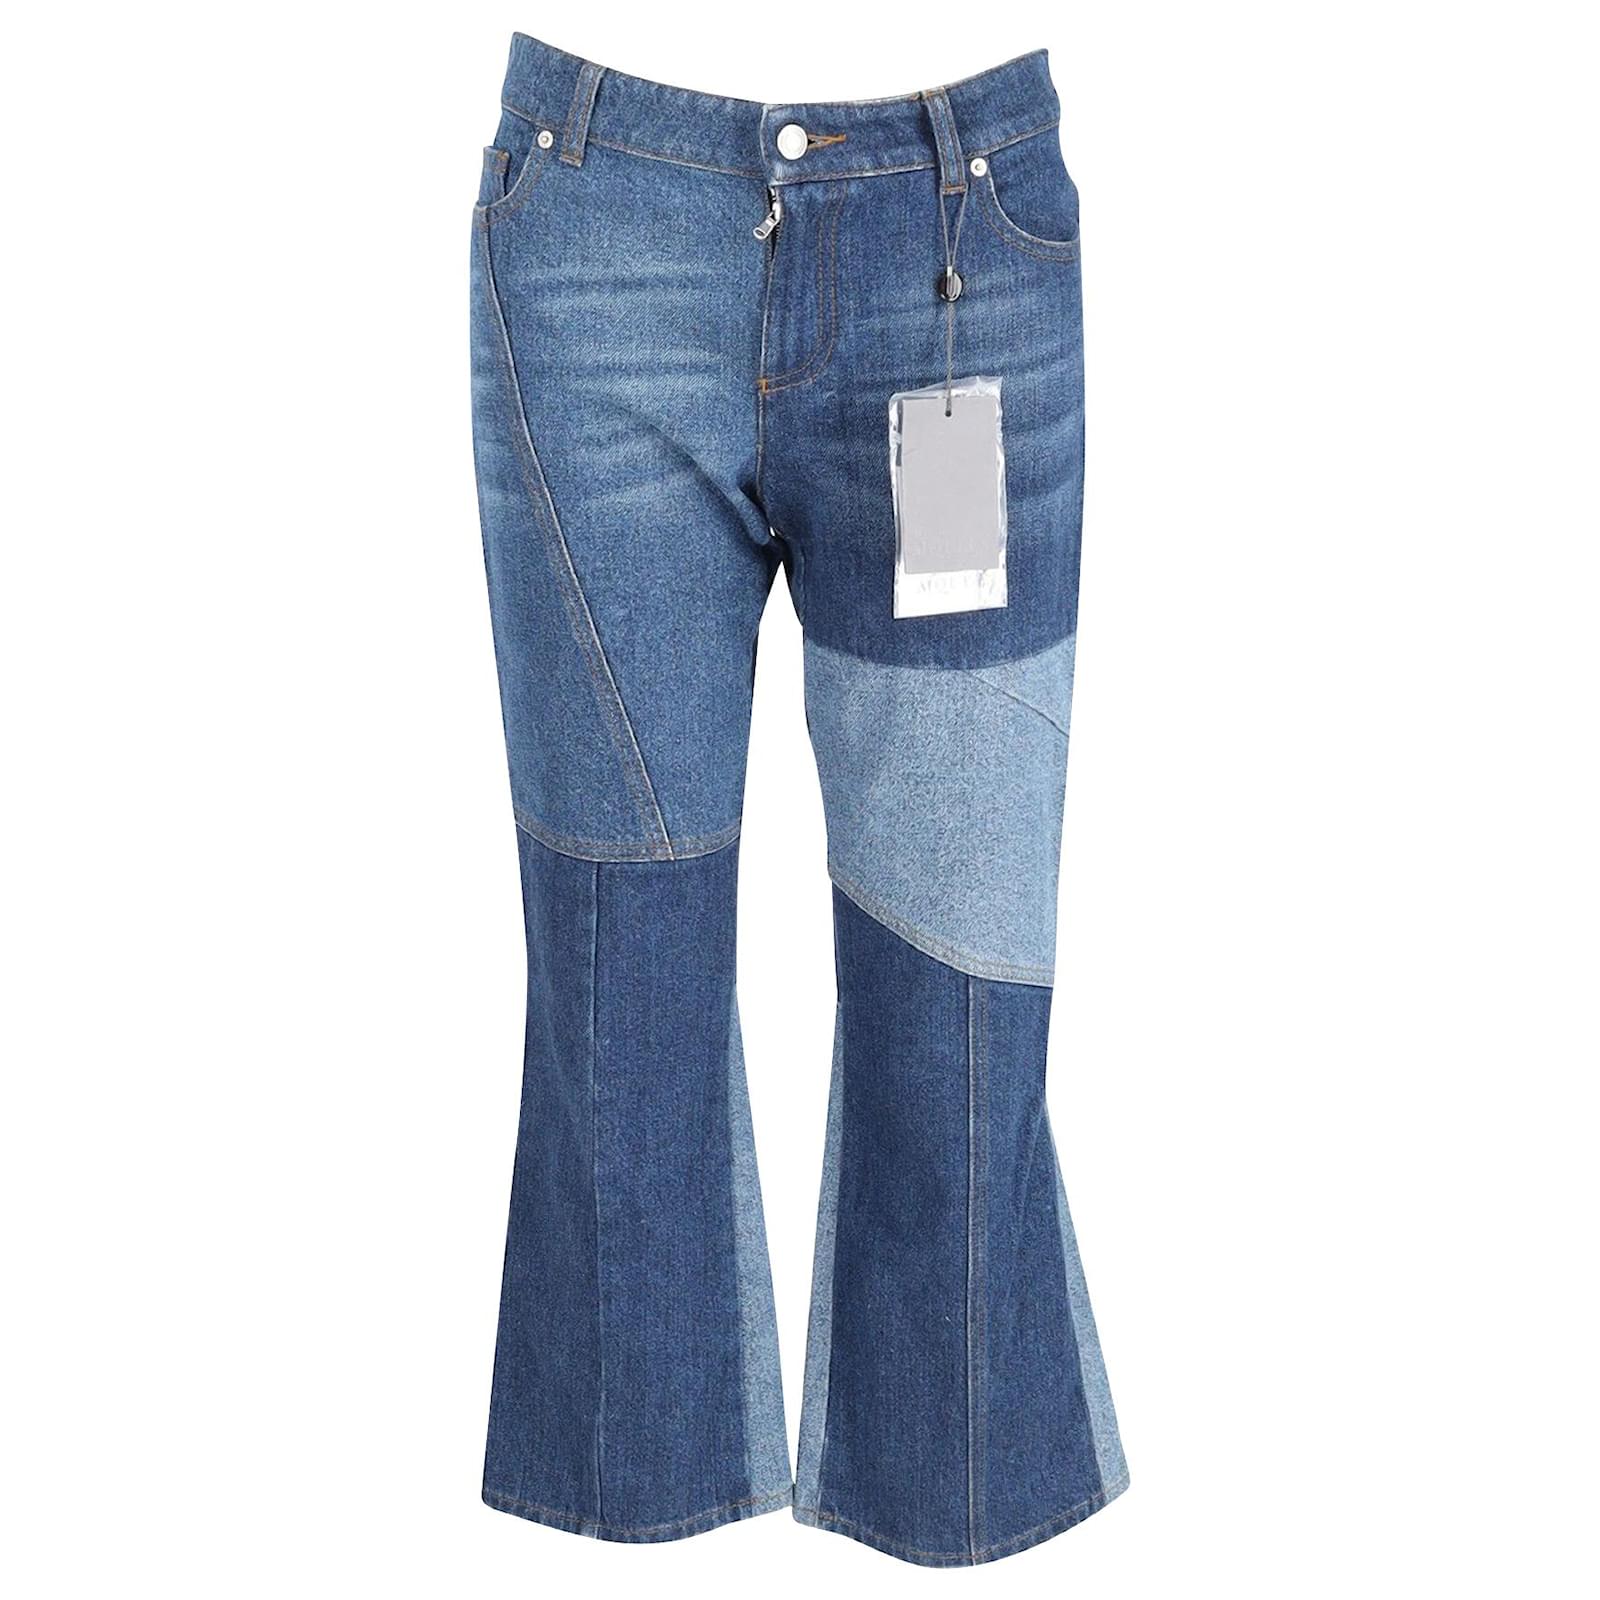 Alexander McQueen Panelled Kick Flare Jeans in Blue Cotton ref